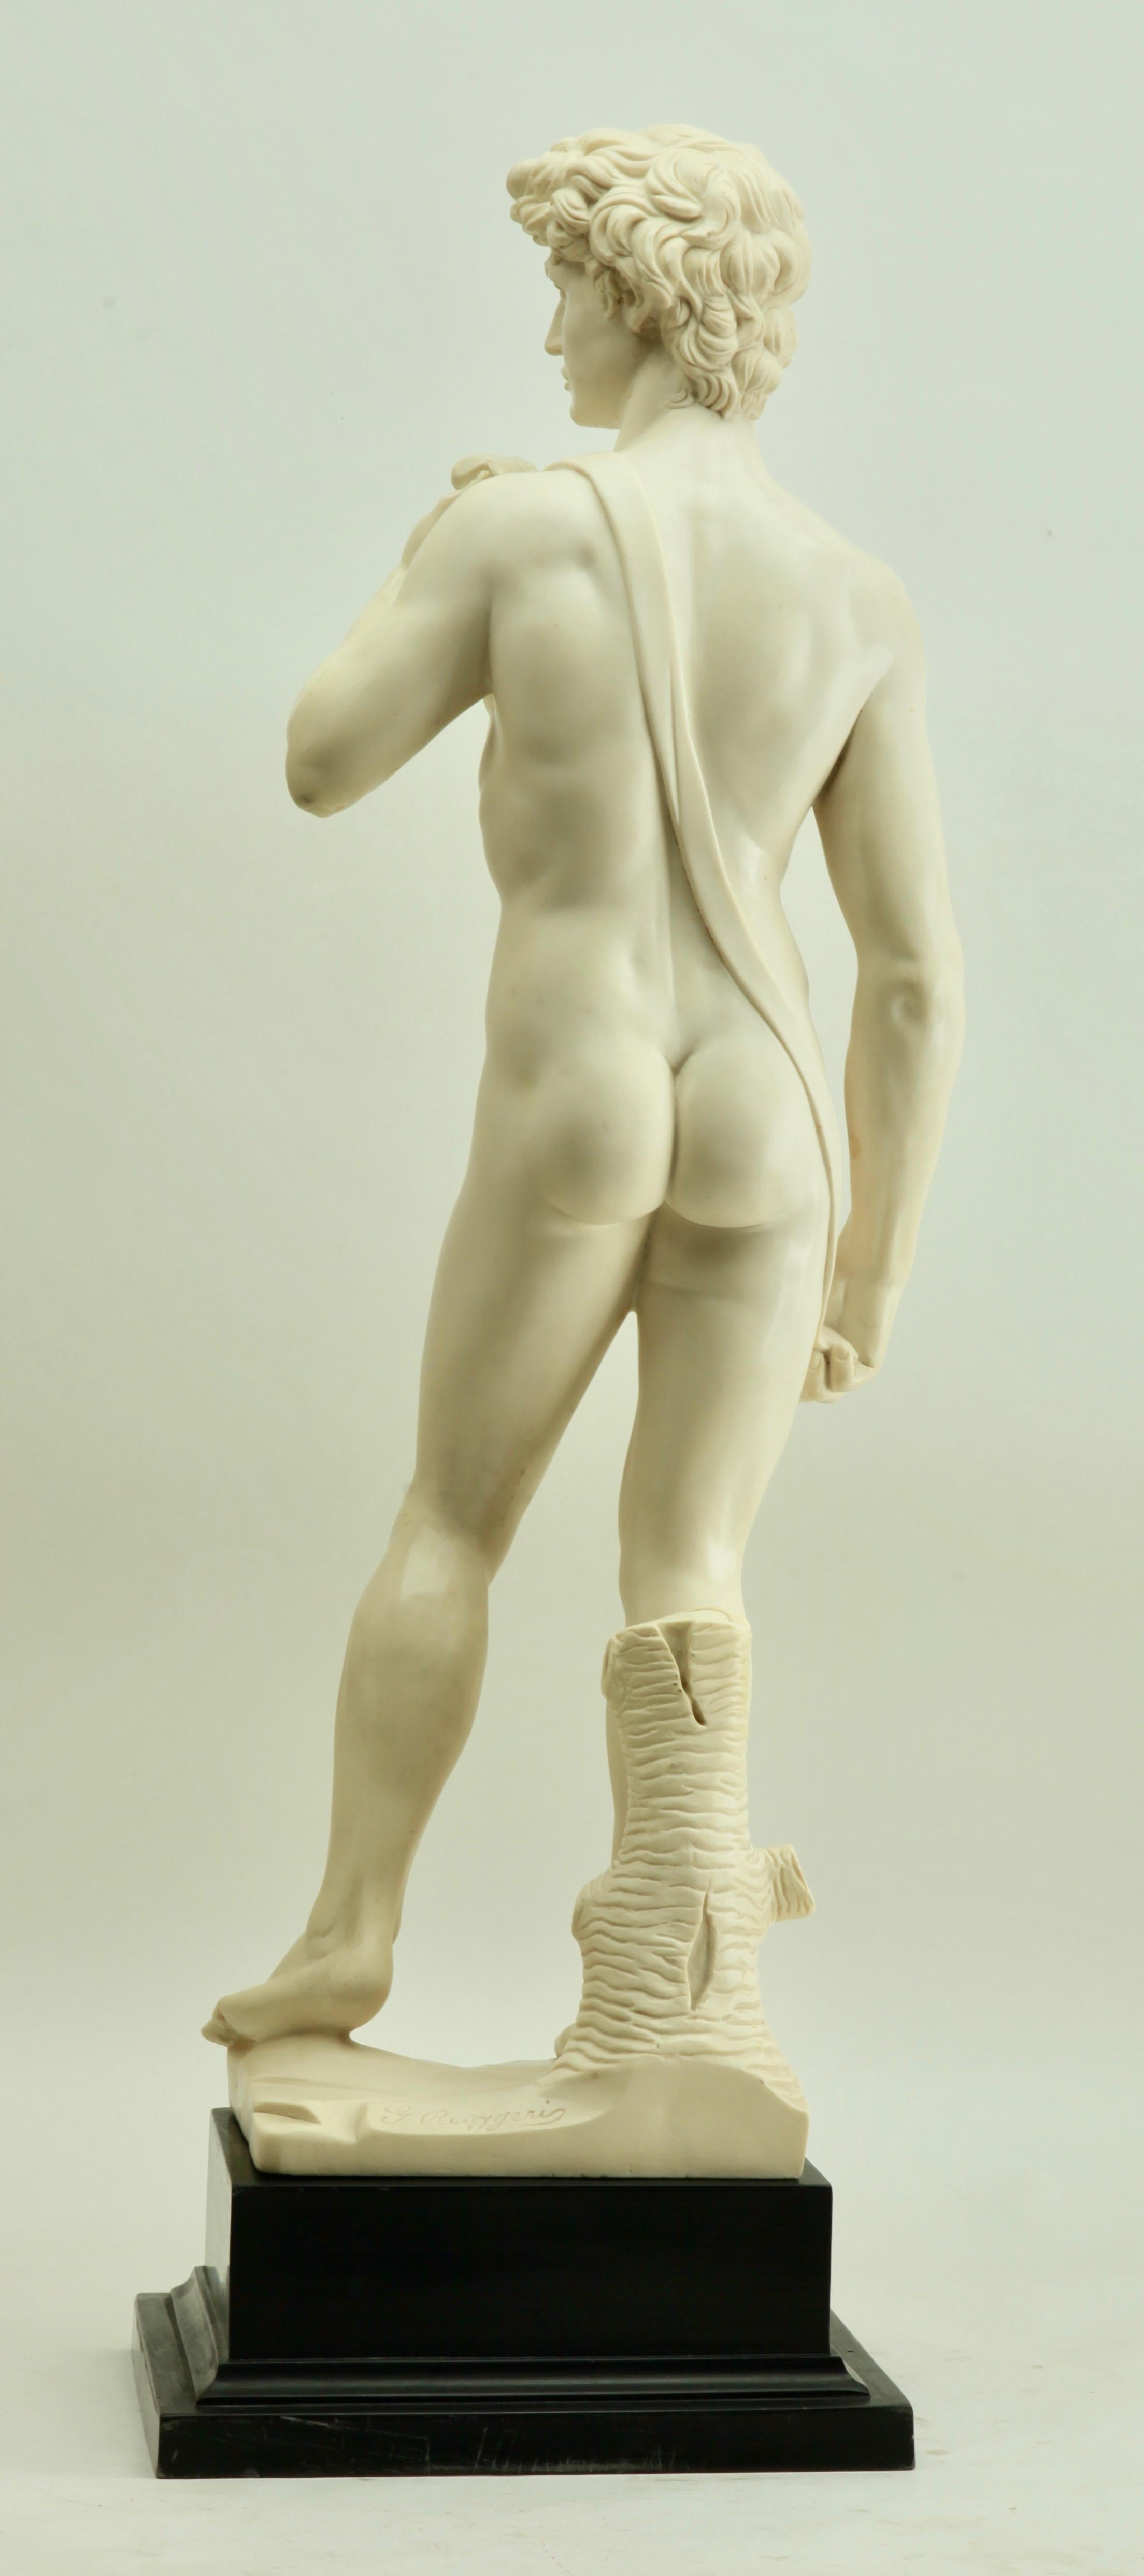 Resin Detailed and Stylized Roman Statue of the 'David' Sculpted by G Ruggeri